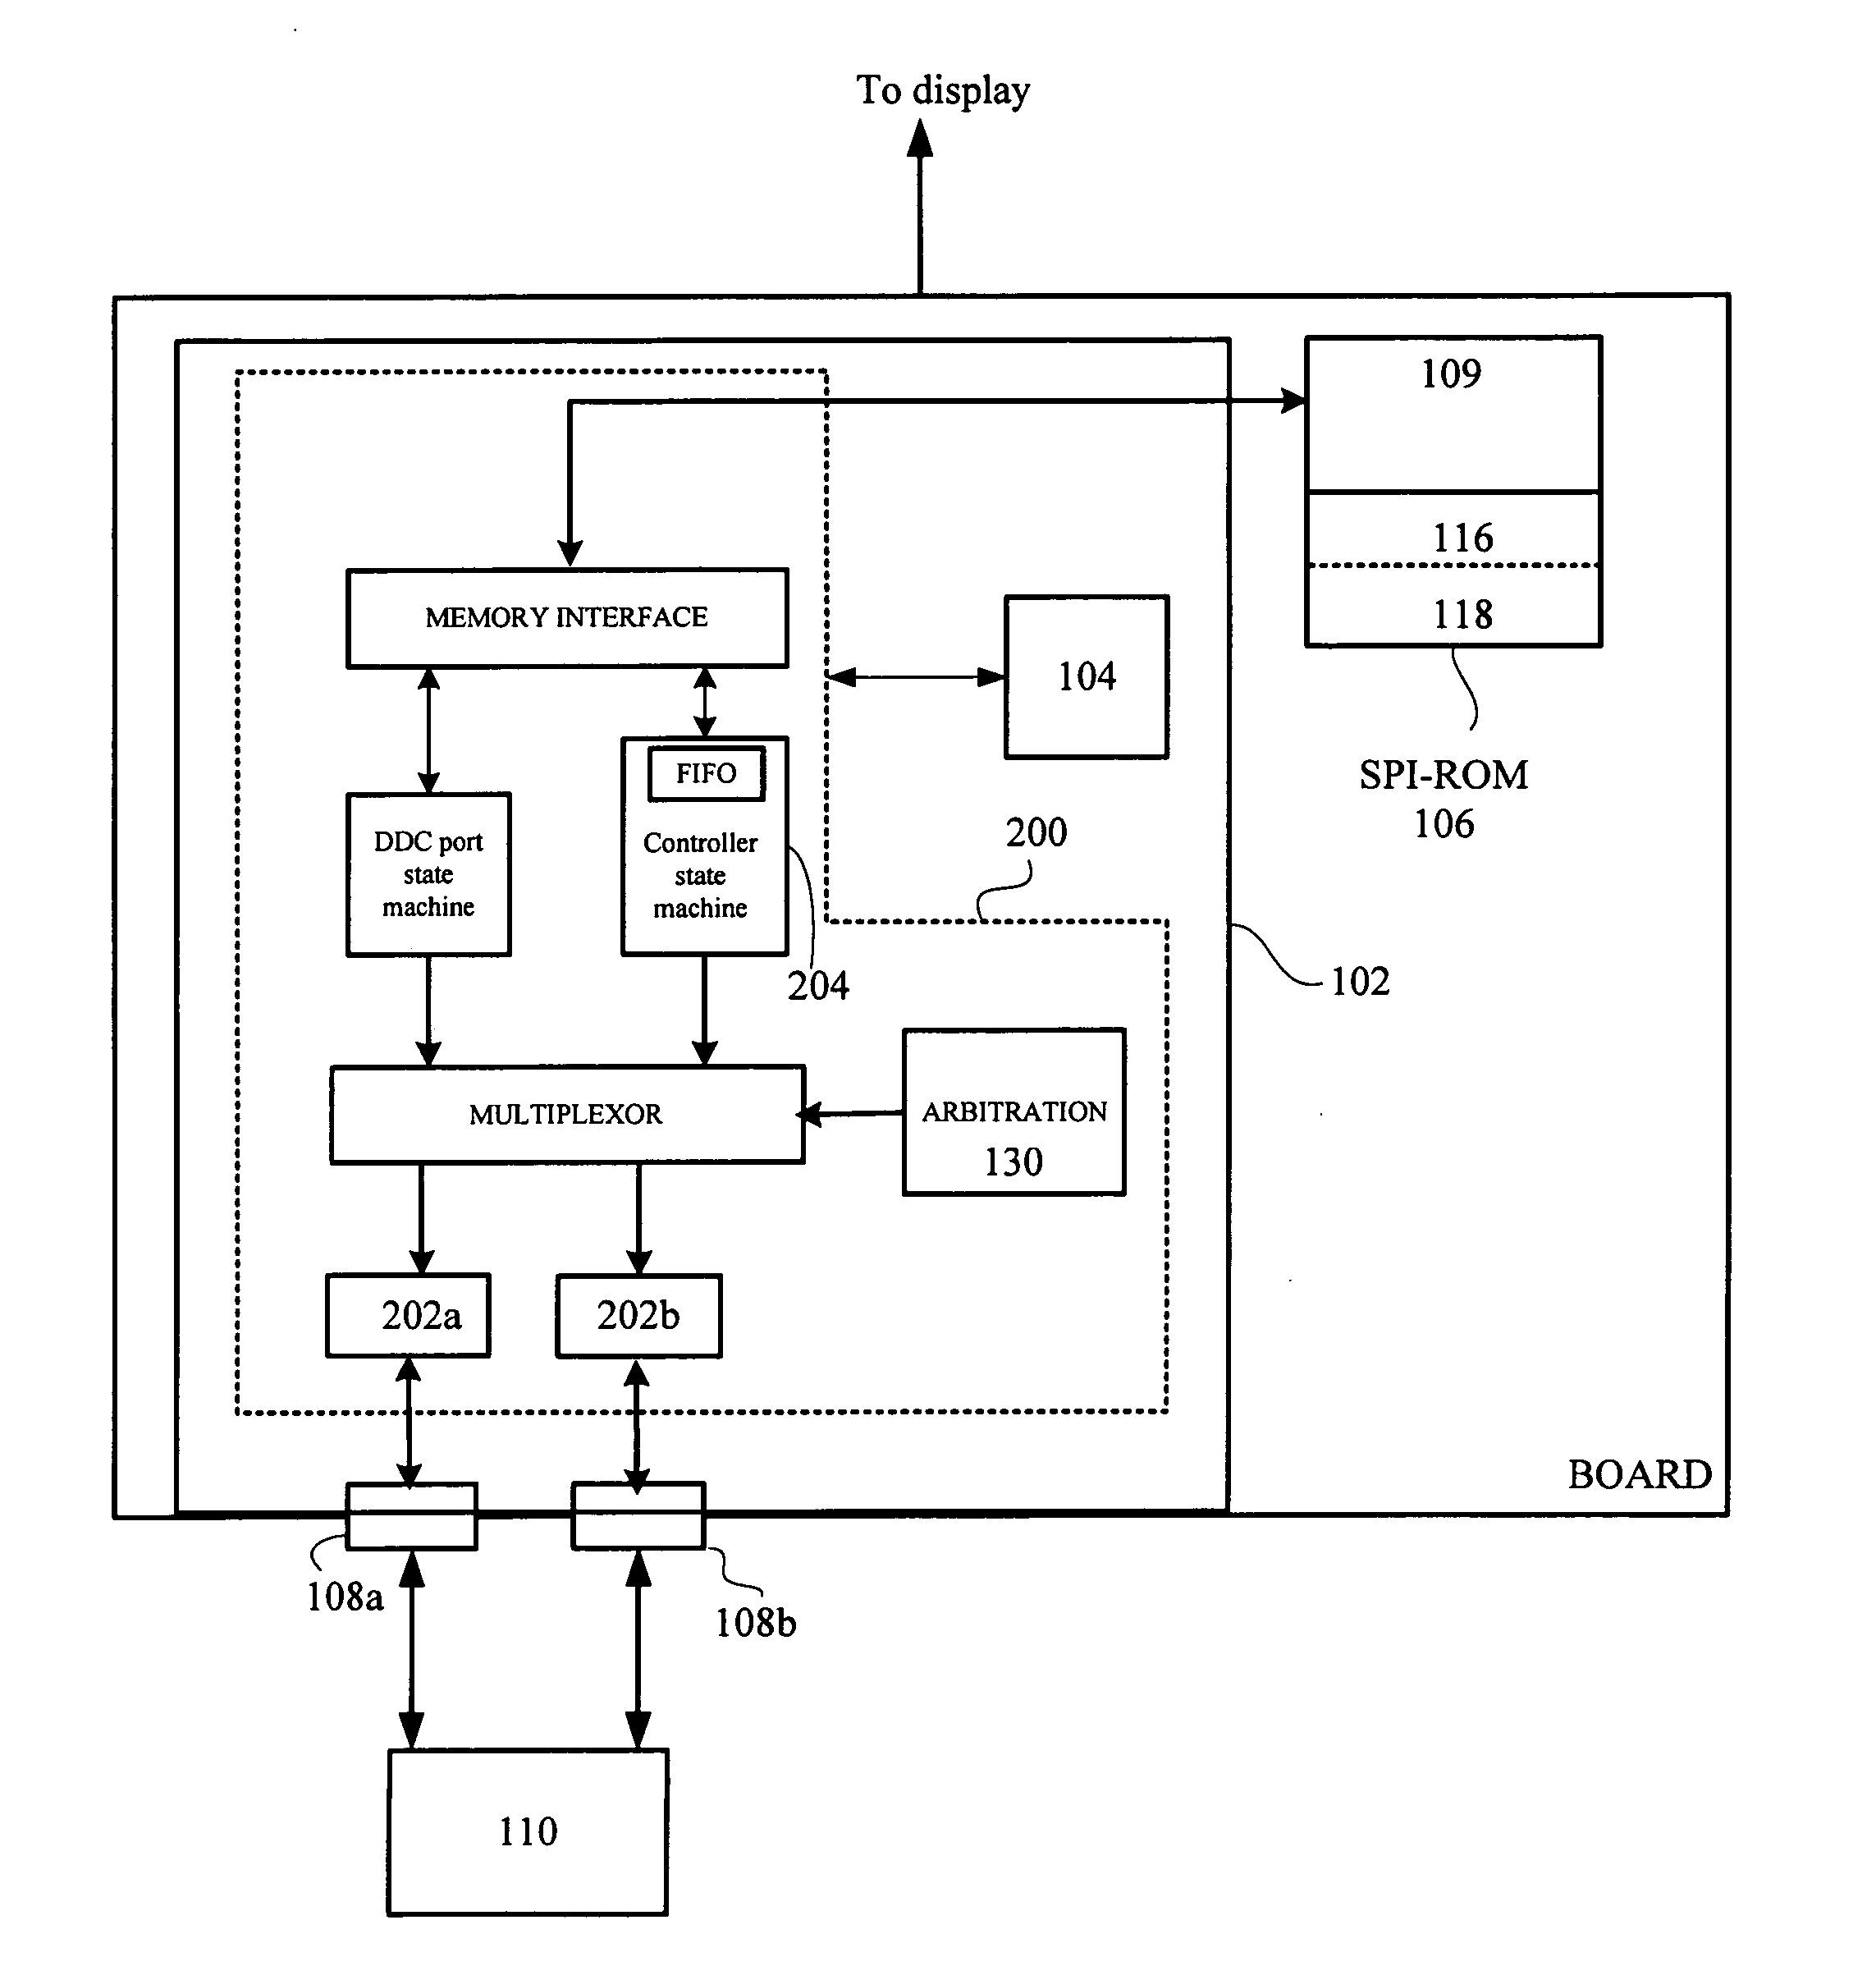 Acquisition of extended display identification data (EDID) using inter-IC (I2C) protocol